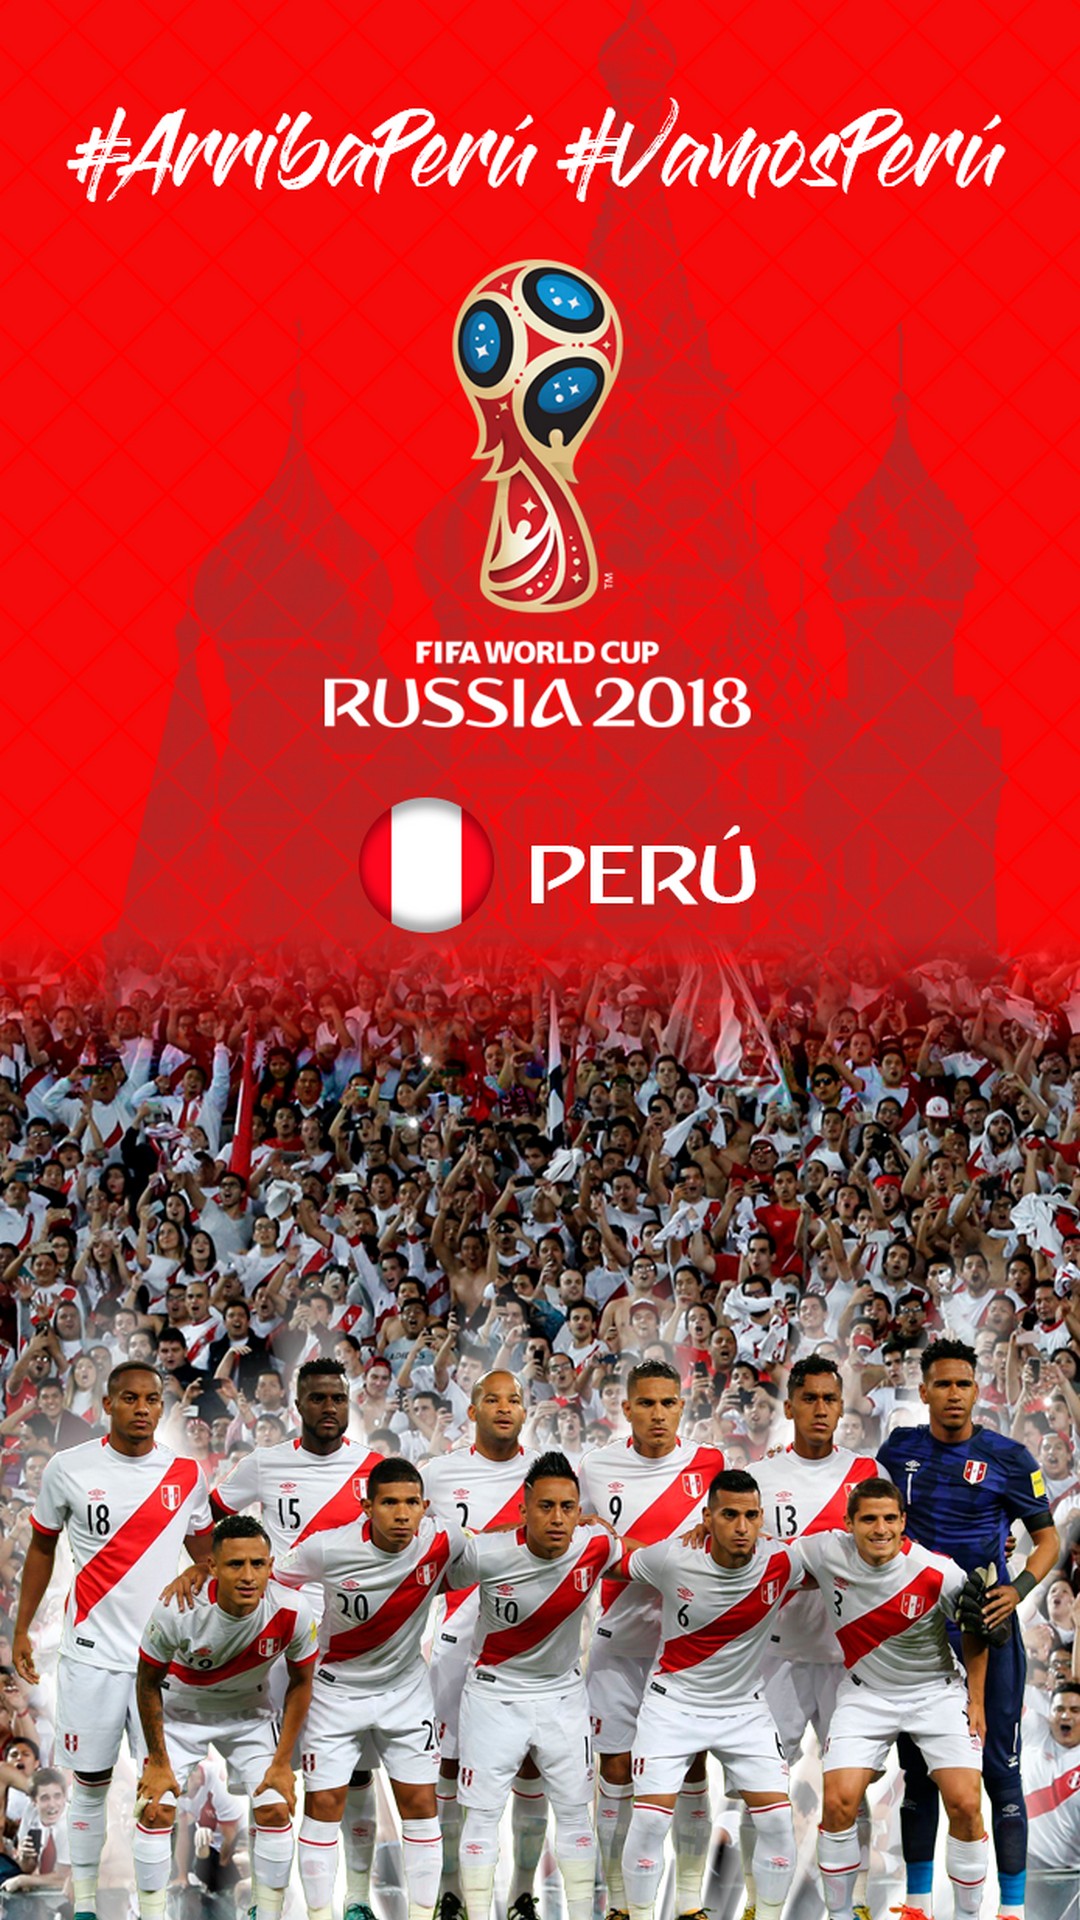 Peru National Team HD Wallpaper For iPhone With Resolution 1080X1920 pixel. You can make this wallpaper for your Mac or Windows Desktop Background, iPhone, Android or Tablet and another Smartphone device for free